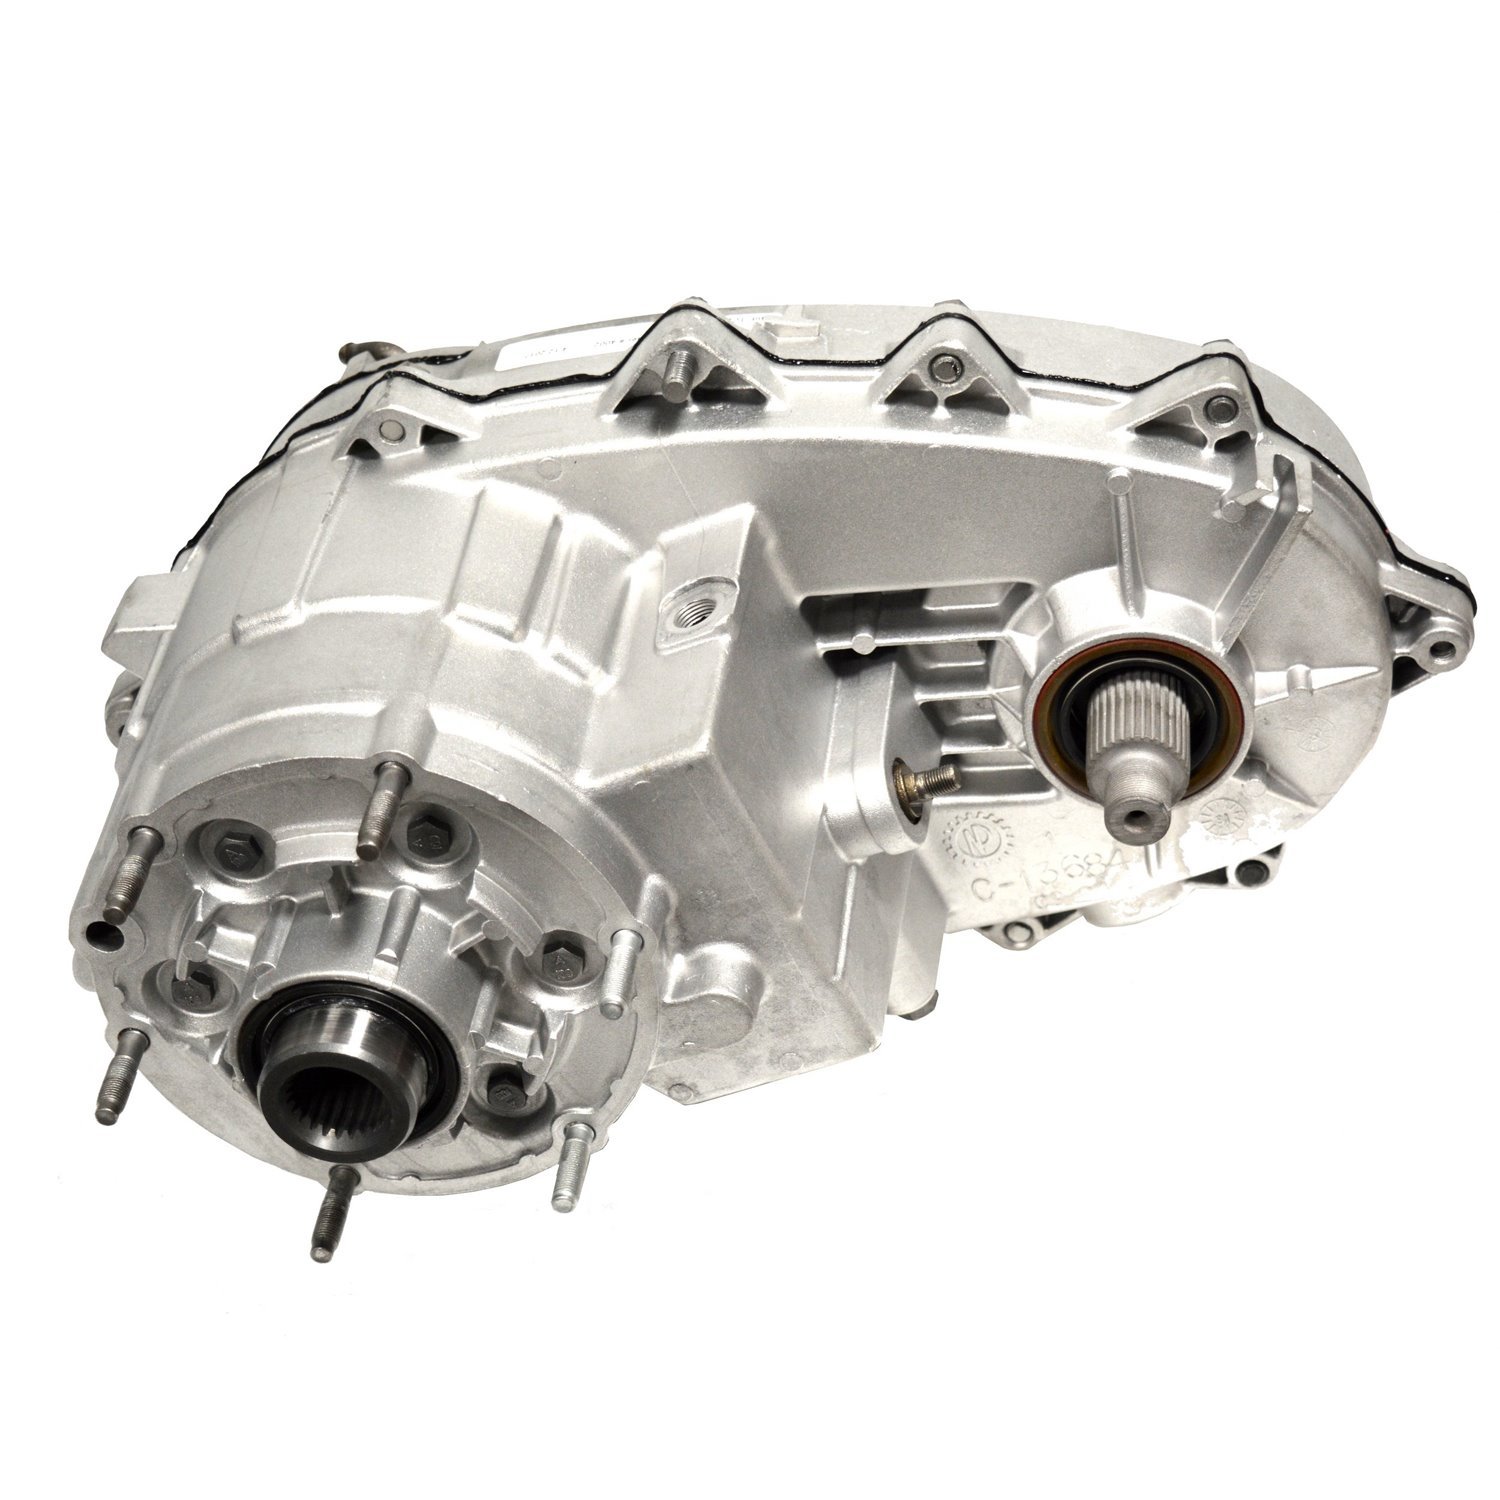 Remanufactured NP208 Transfer Case for Jeep 80-88 Cherokee